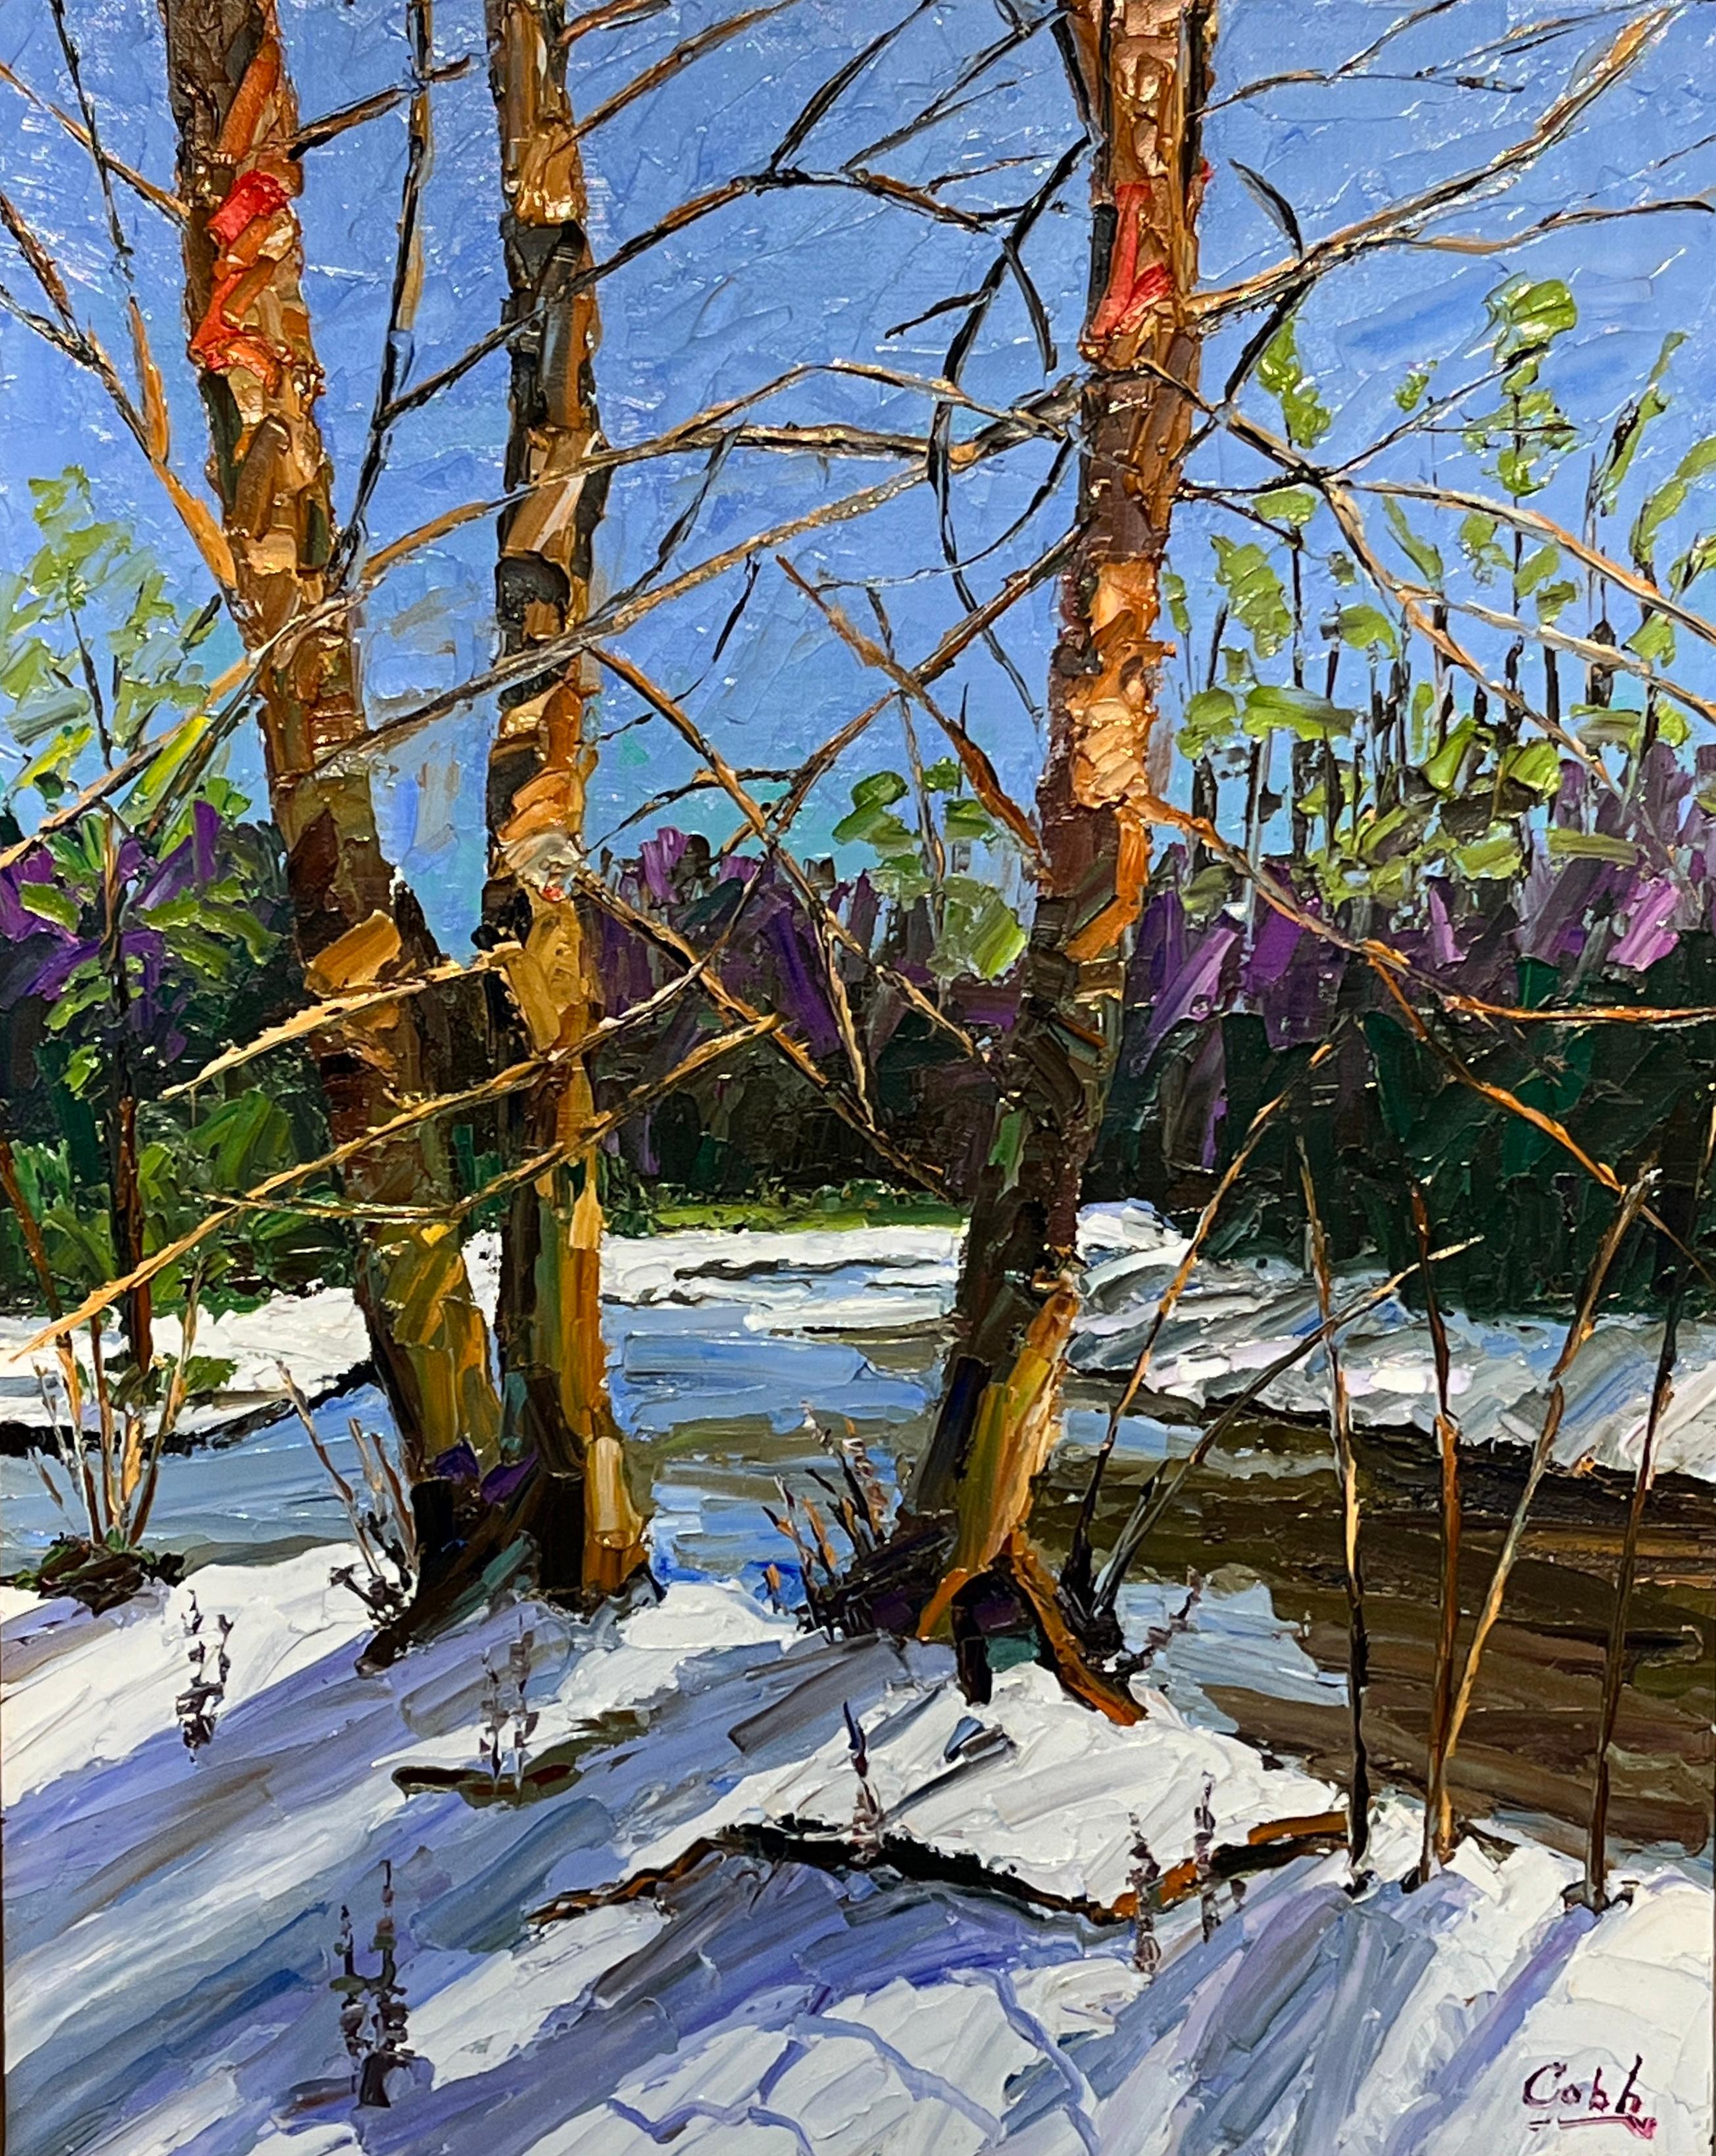 'River Birch' by James Cobb, Oil on Canvas Painting